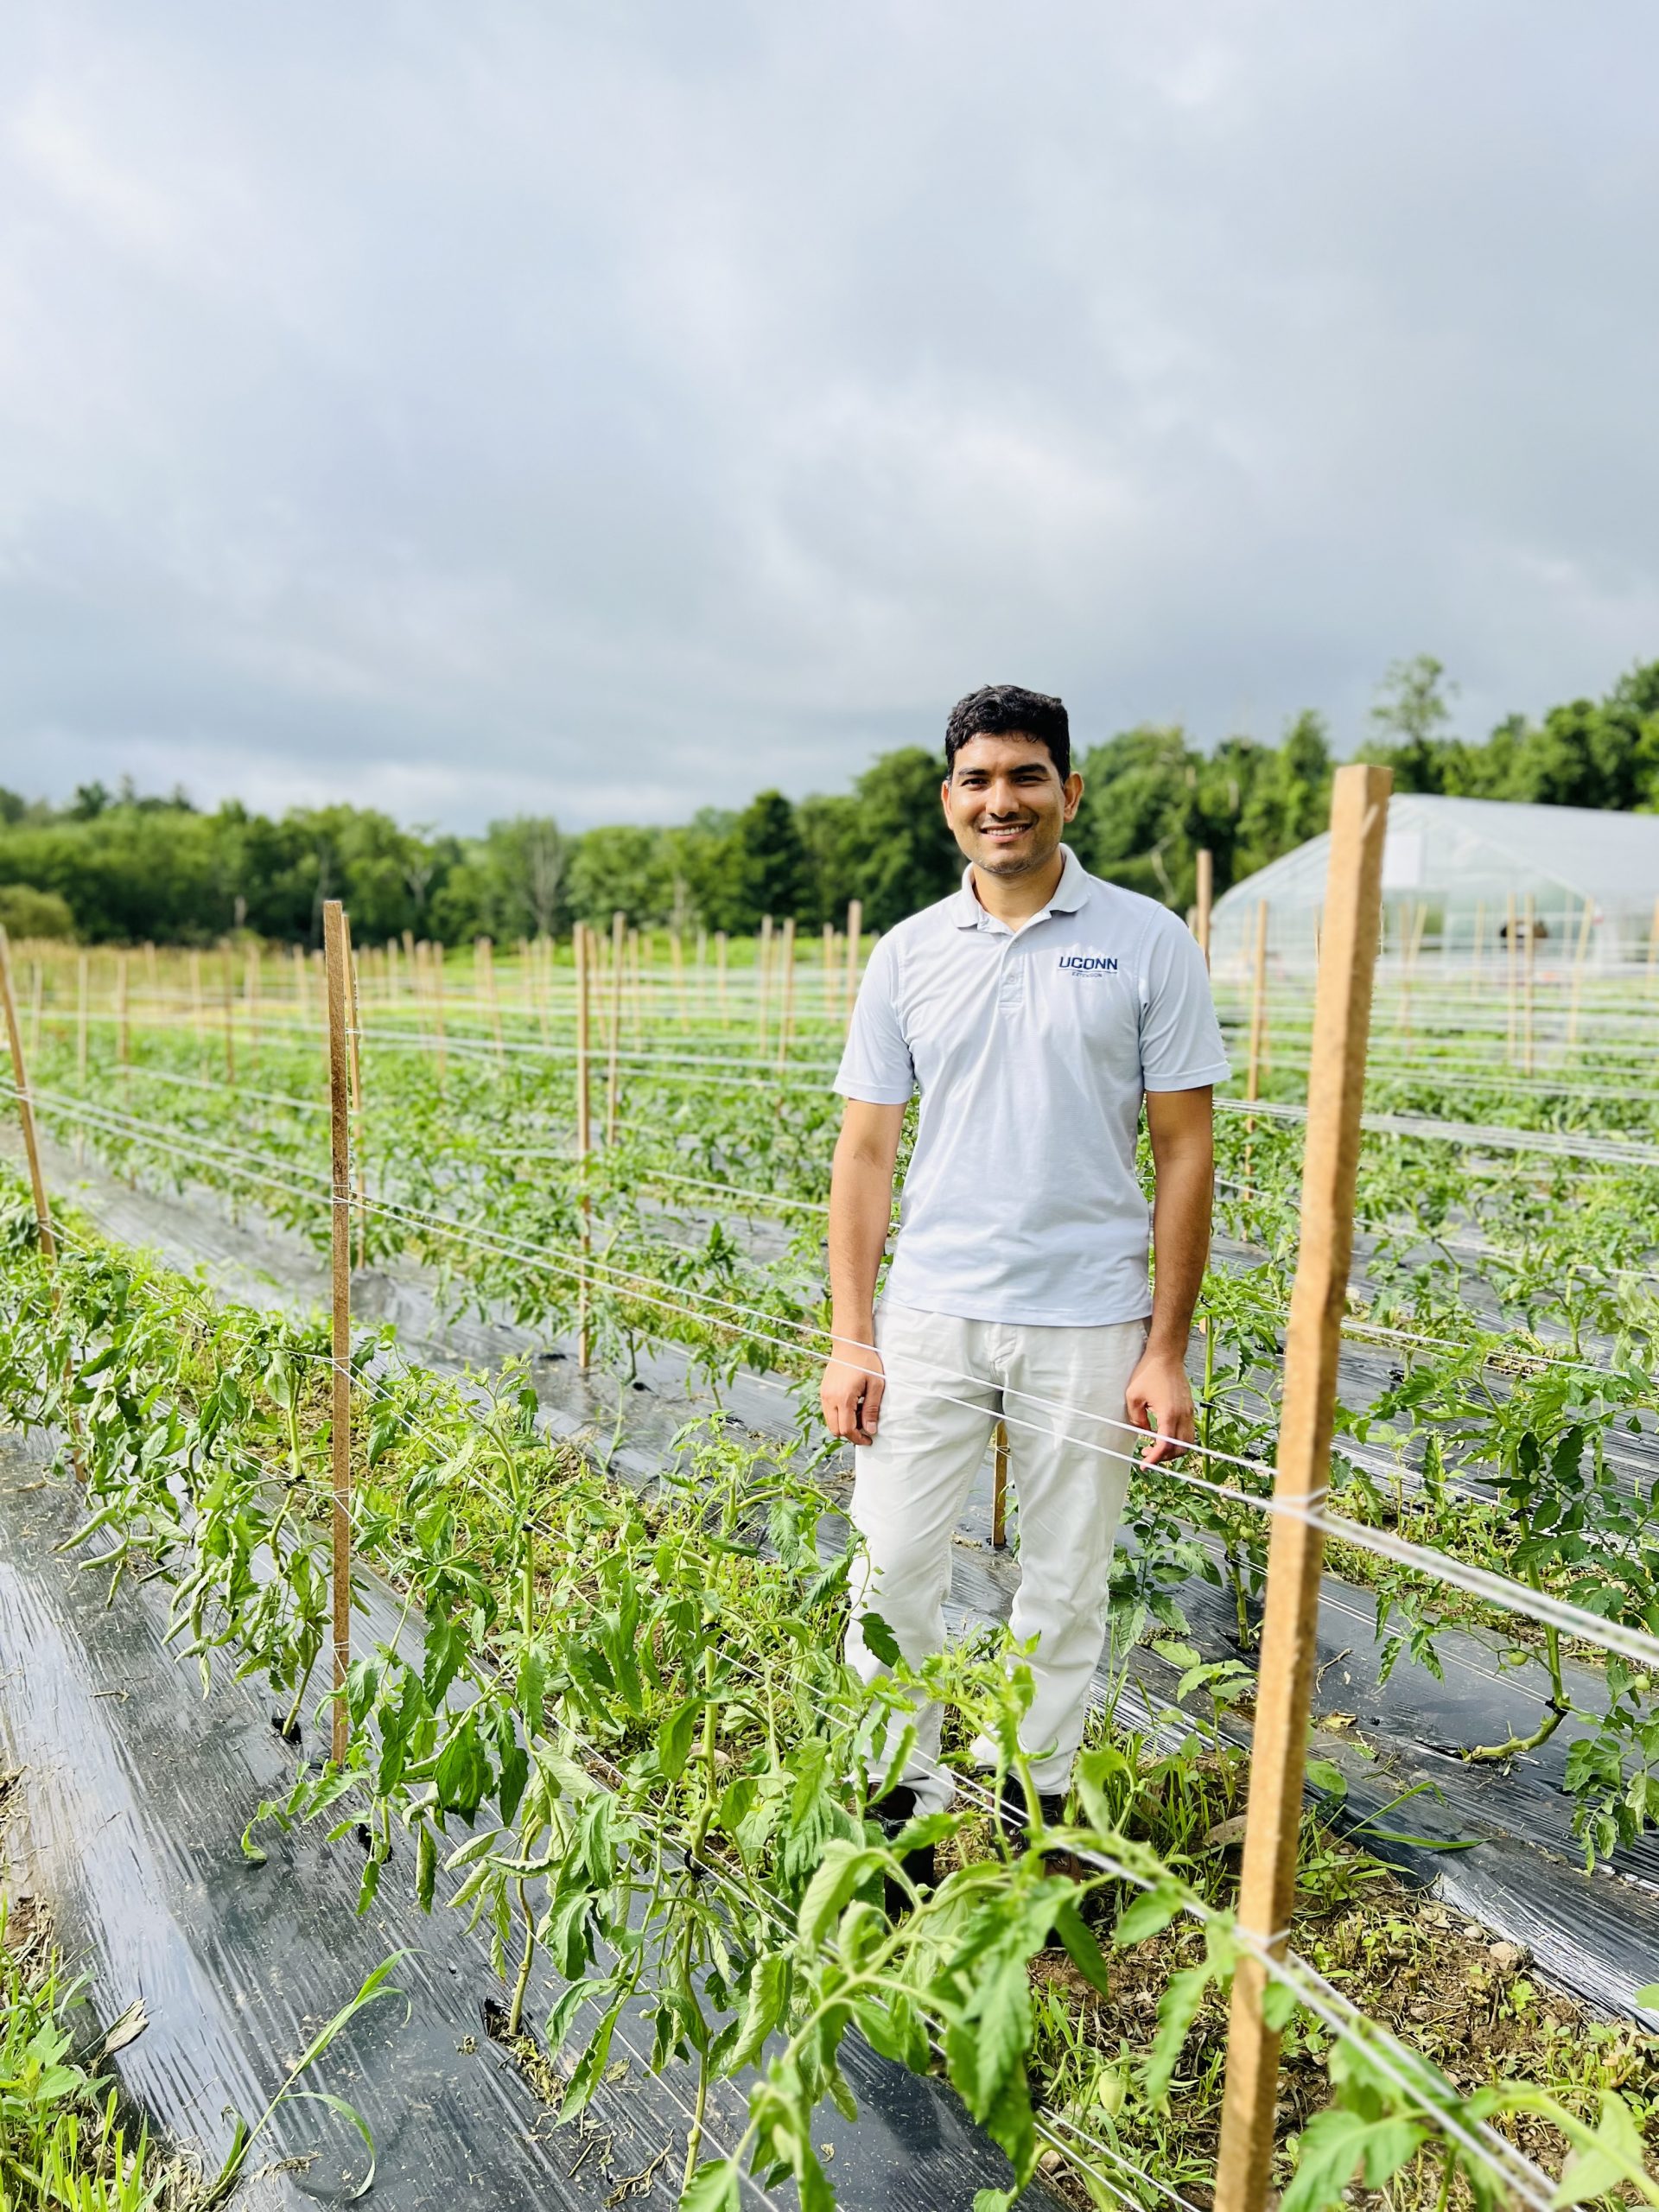 Shuresh Ghimire standing between rows of tomato plants on a farm